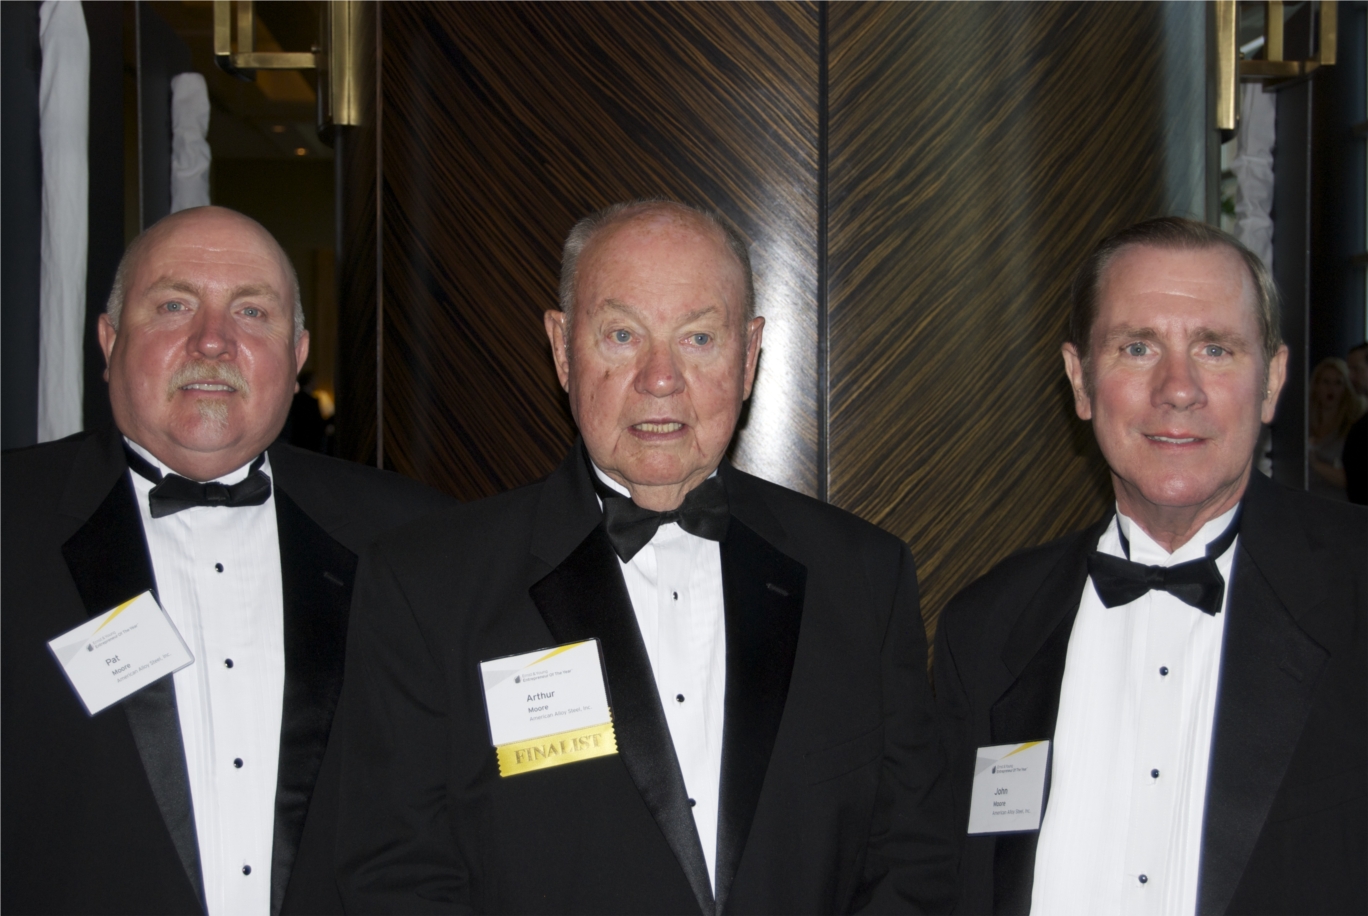 Pat Moore, Art Moore and John Moore at the Entrepreneur of the Year Ceremony 2013 Gulf Coast Area honoring Art Moore